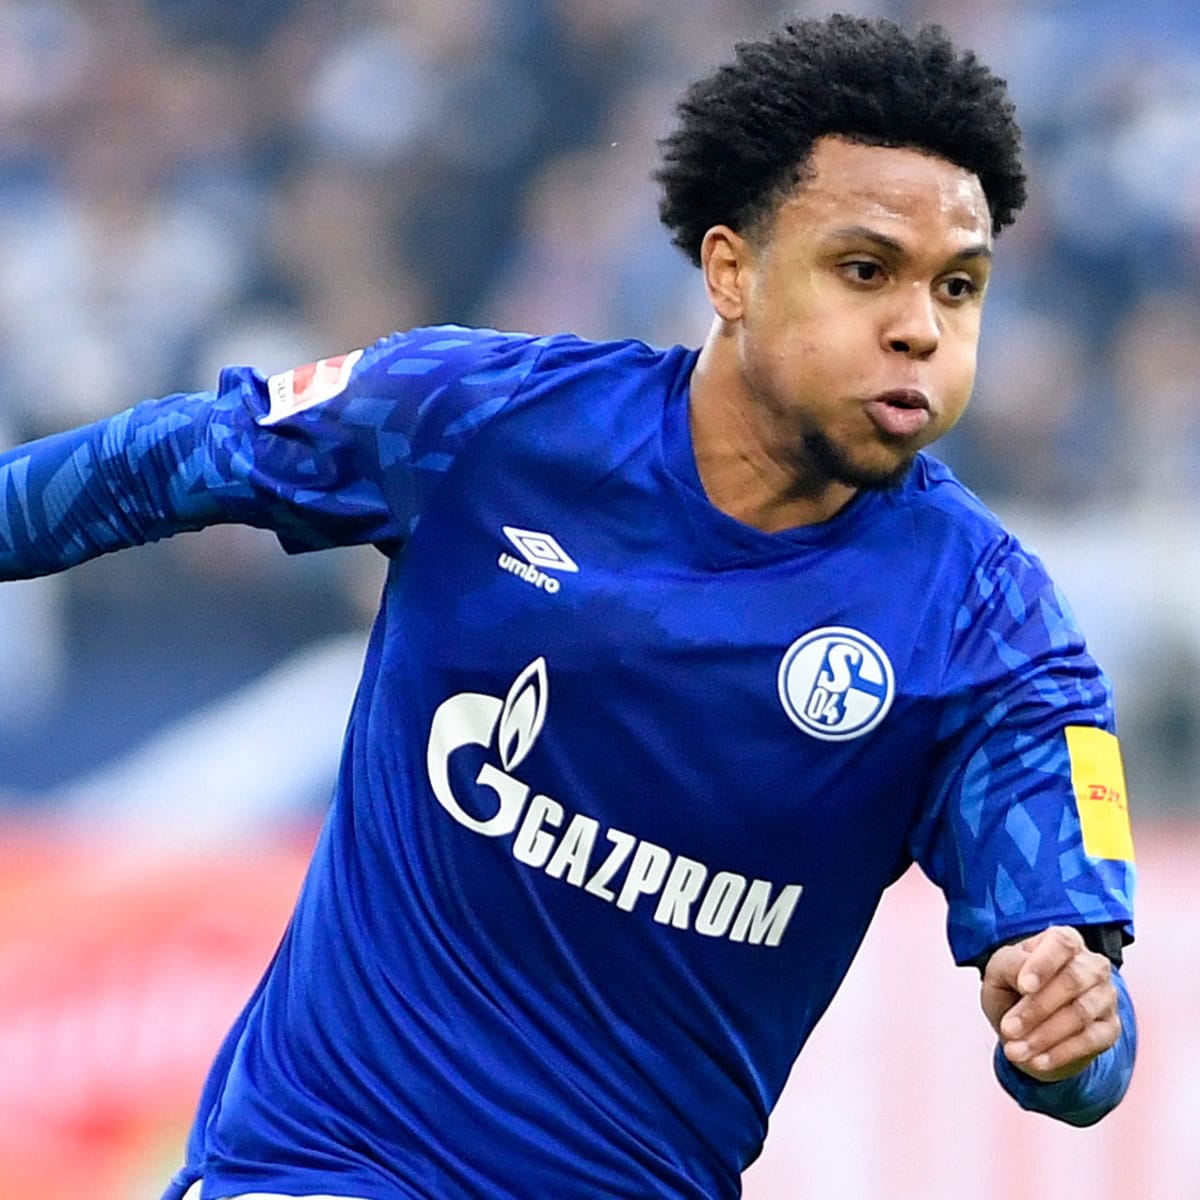 Juventus could promote U23 starlet to cover for the injured McKennie 